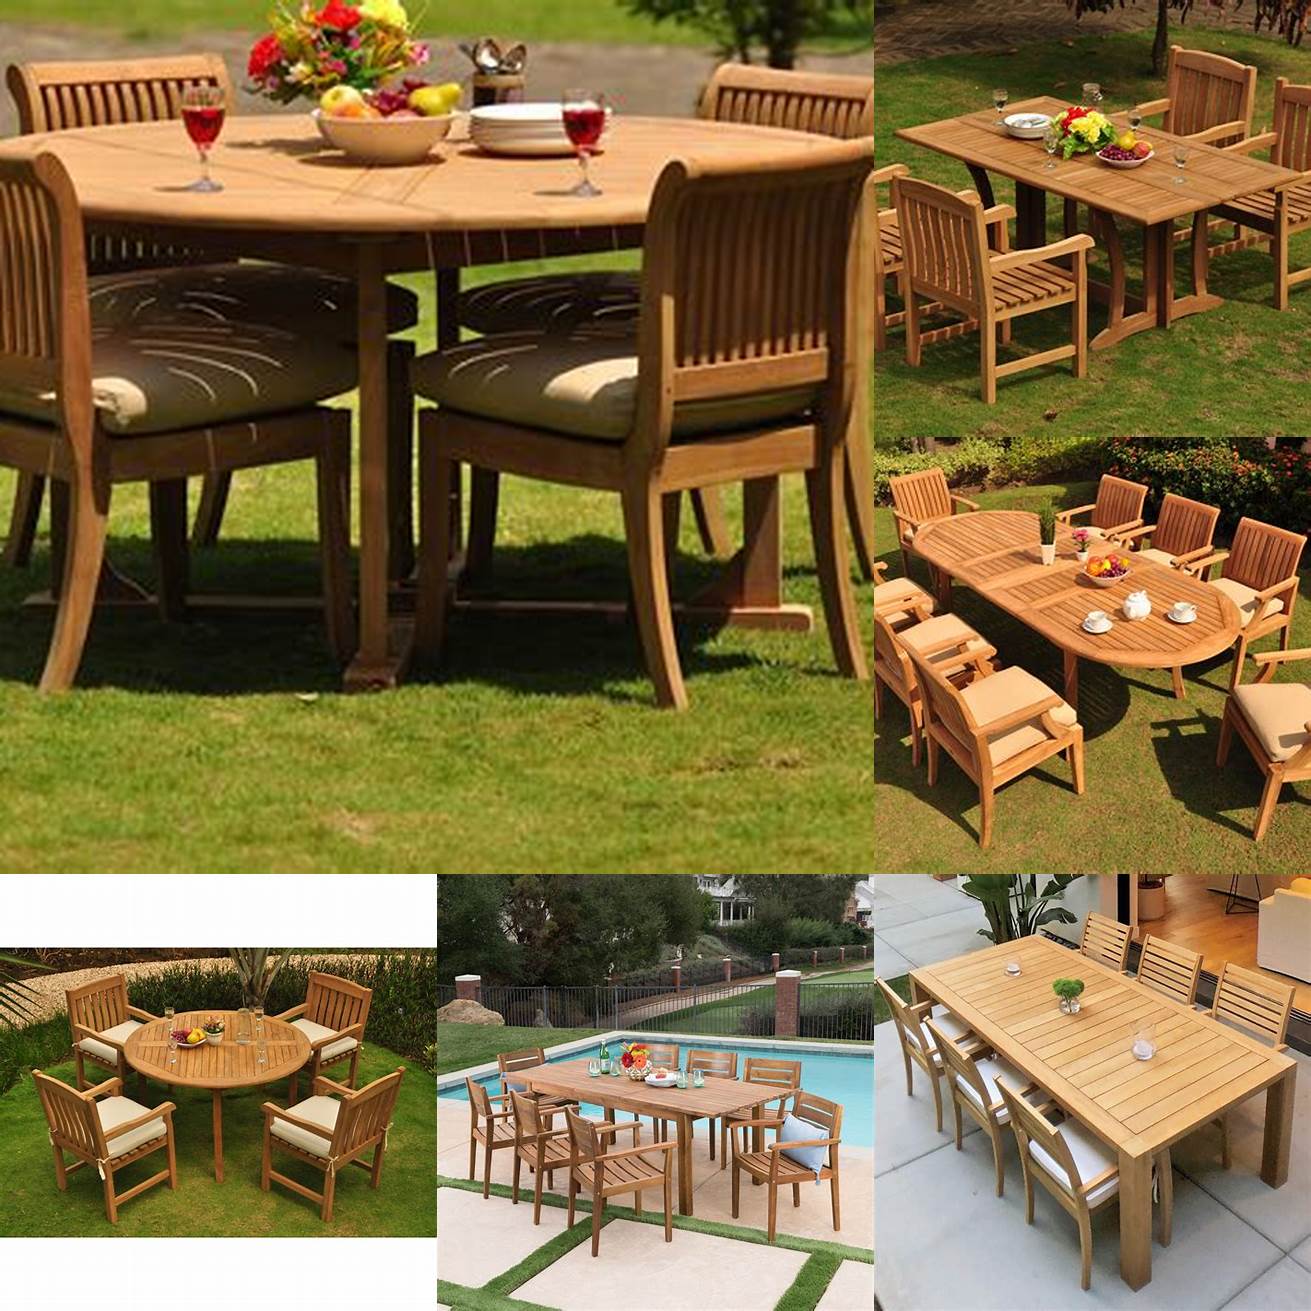 Teak Wood Dining Table in an Outdoor Setting